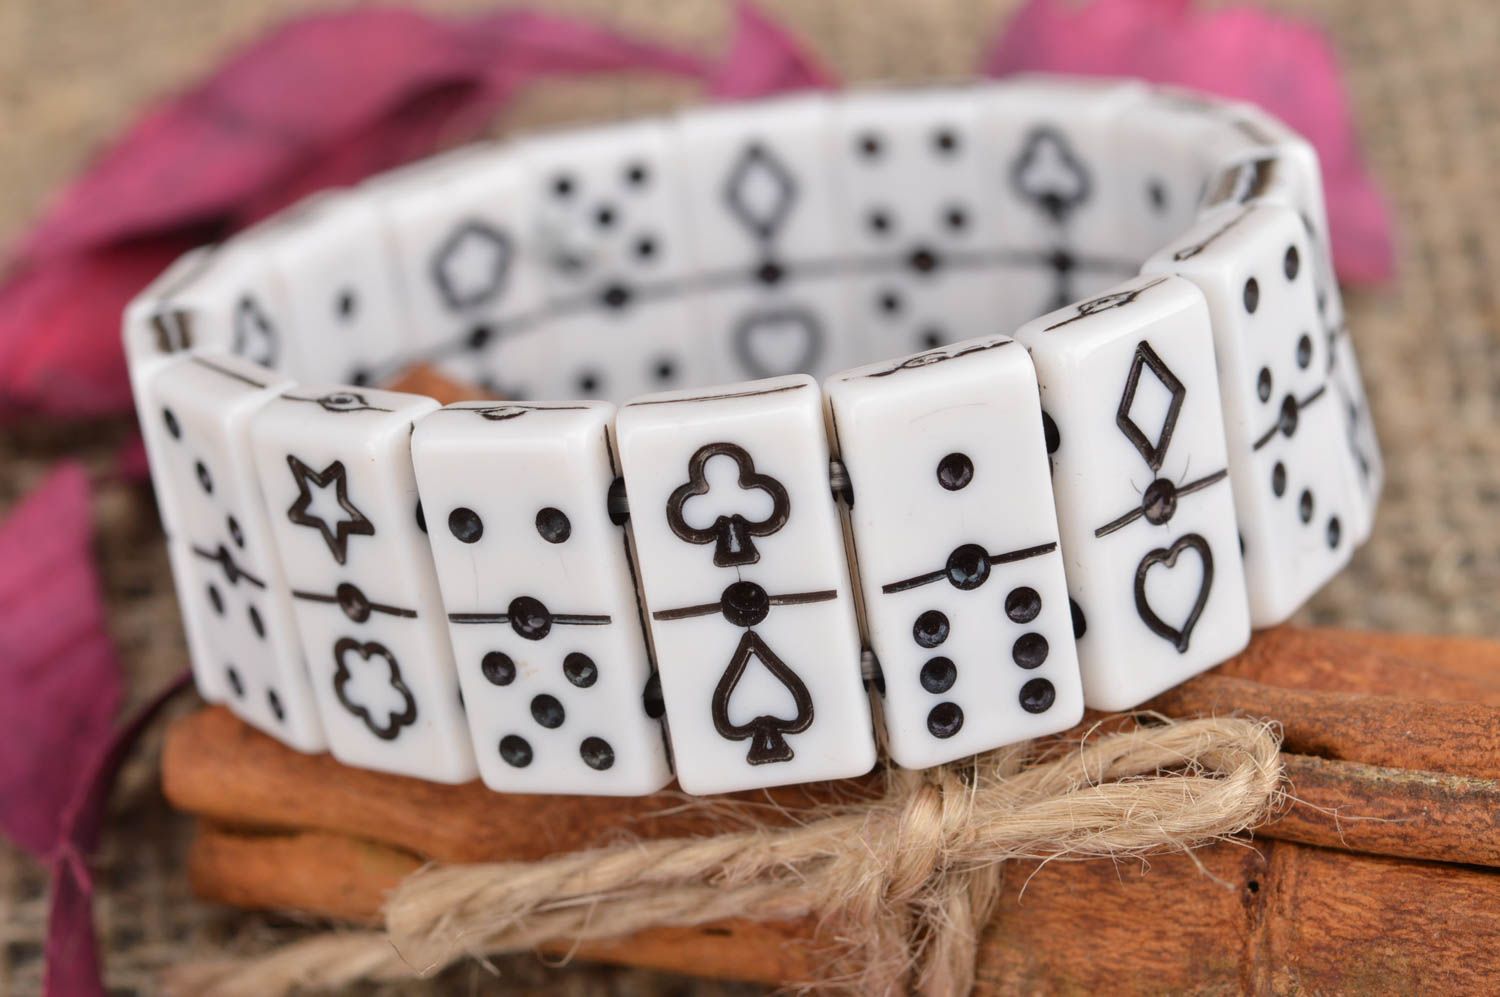 Black and white bracelet made of flat beads in shape of dominoes counters photo 1